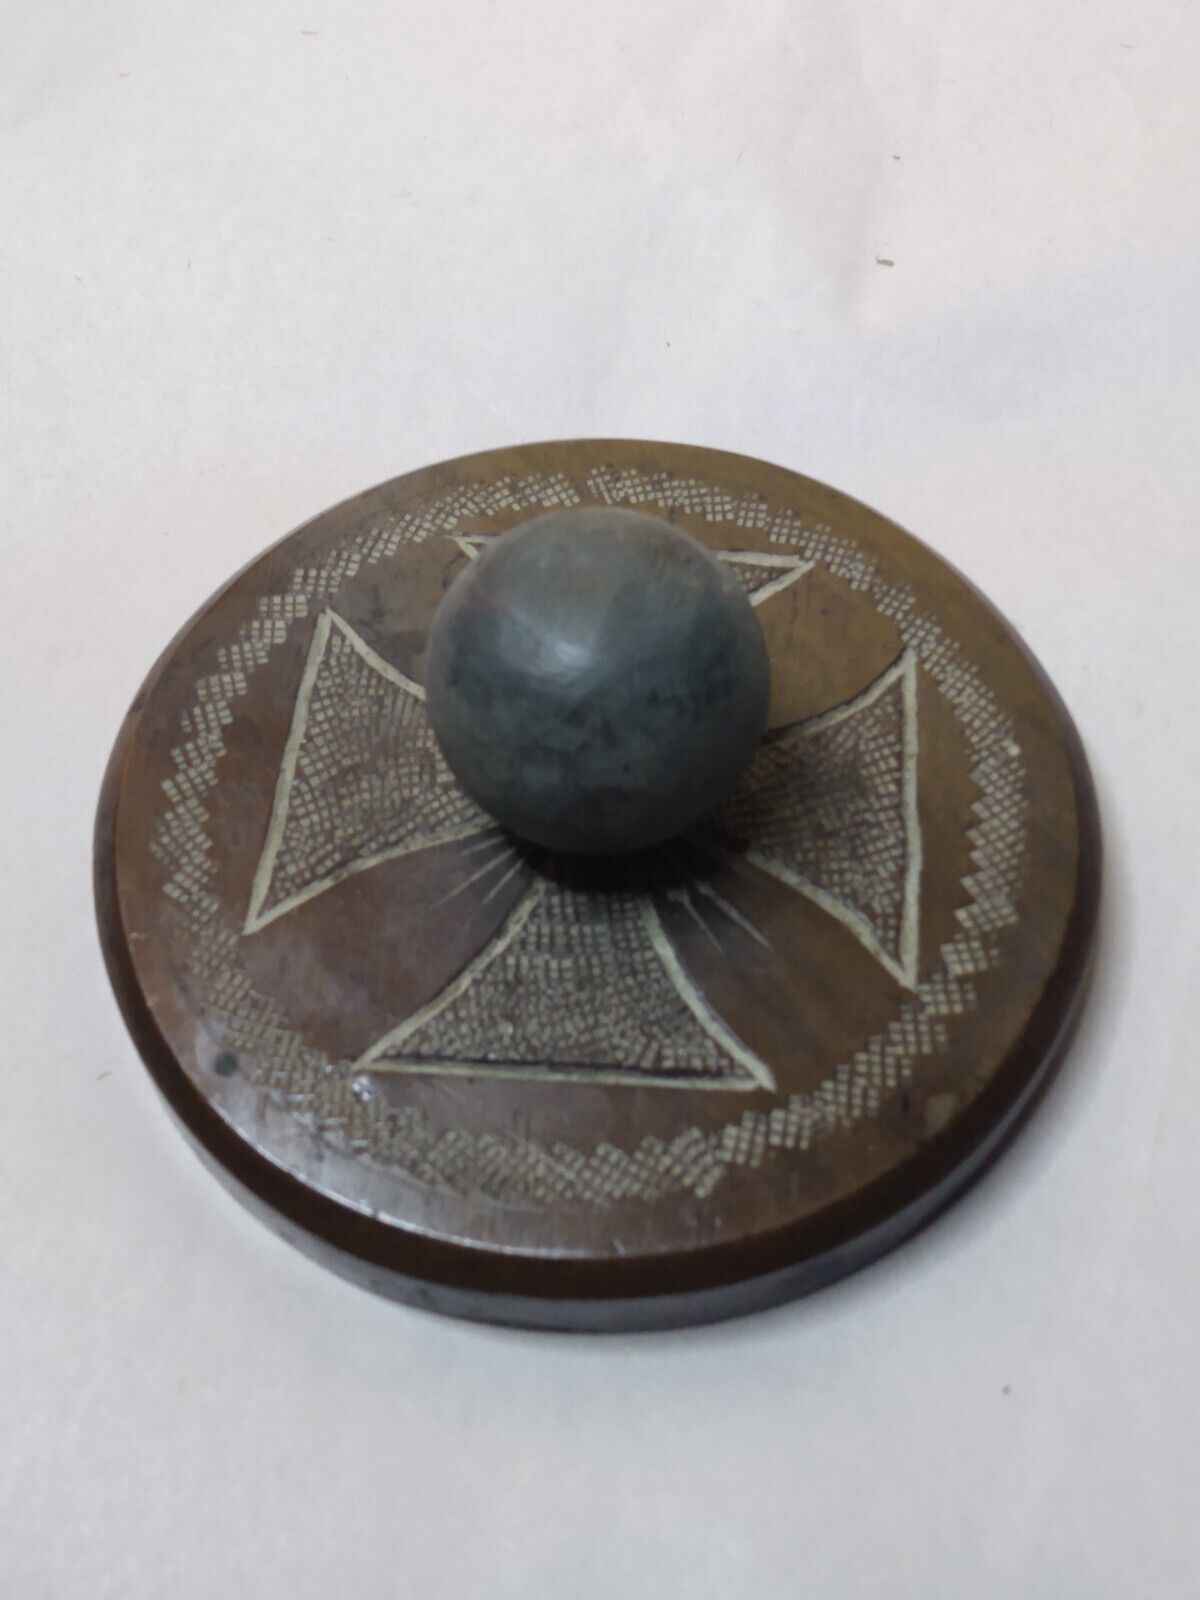 Antique German Napoleonic Cannon Ball Iron Cross Paperweight 